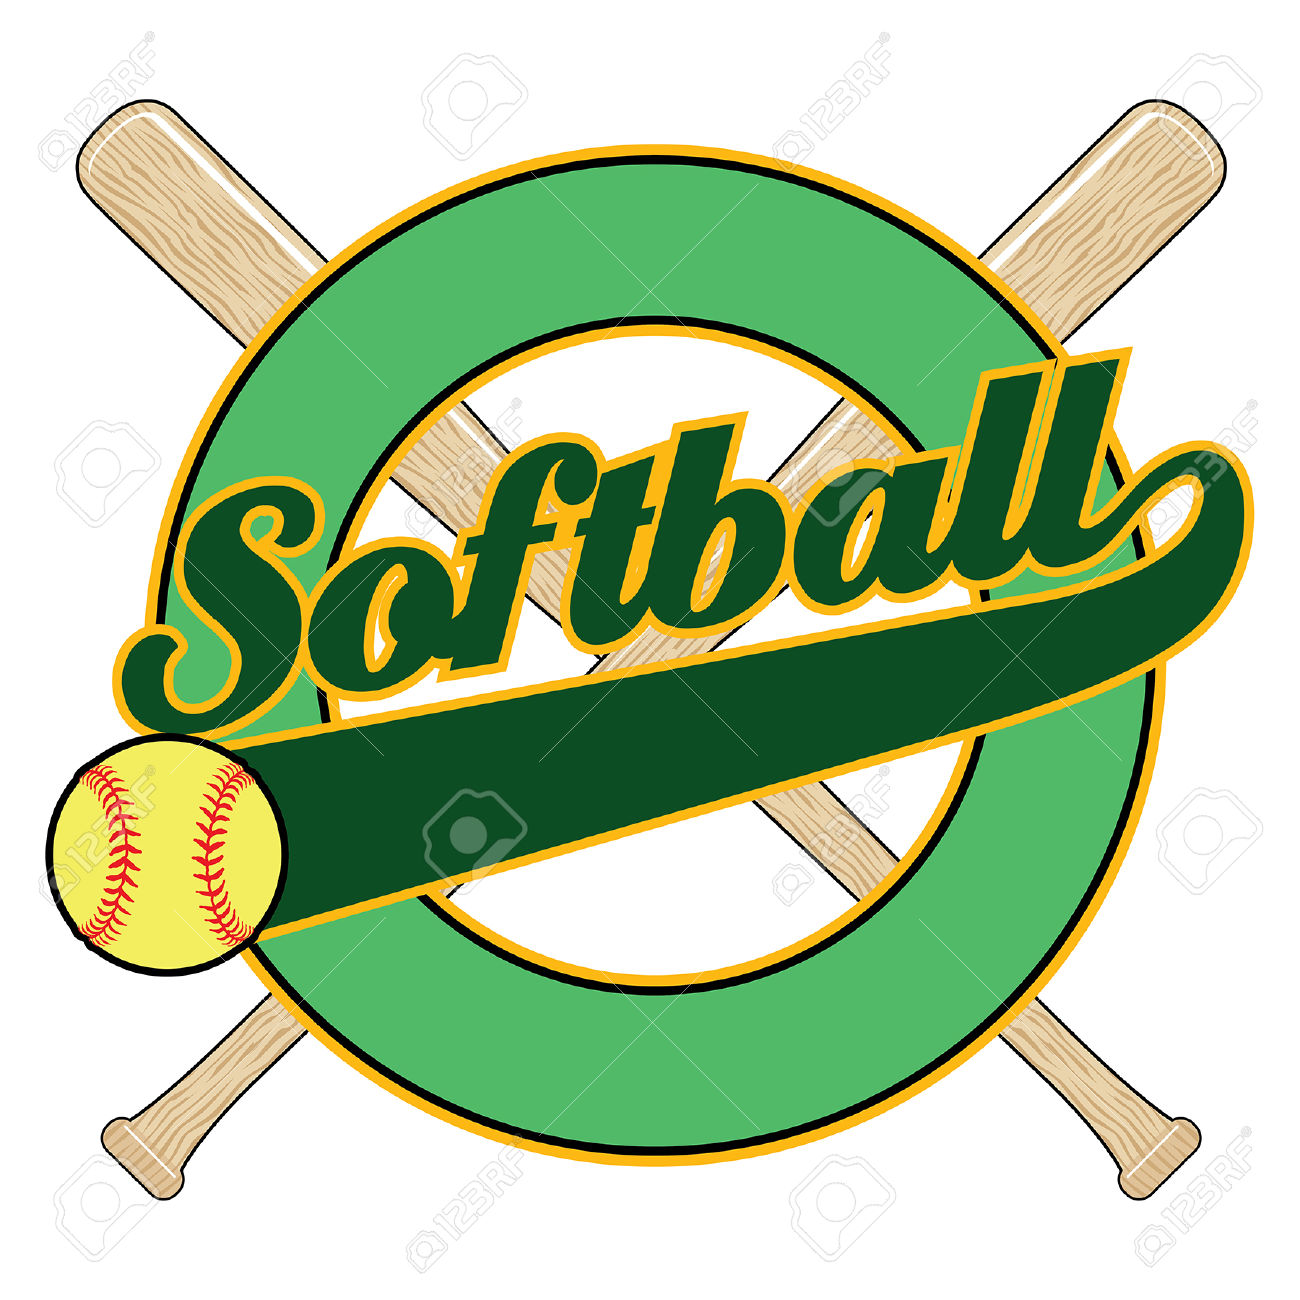 Softball clipart with text box 